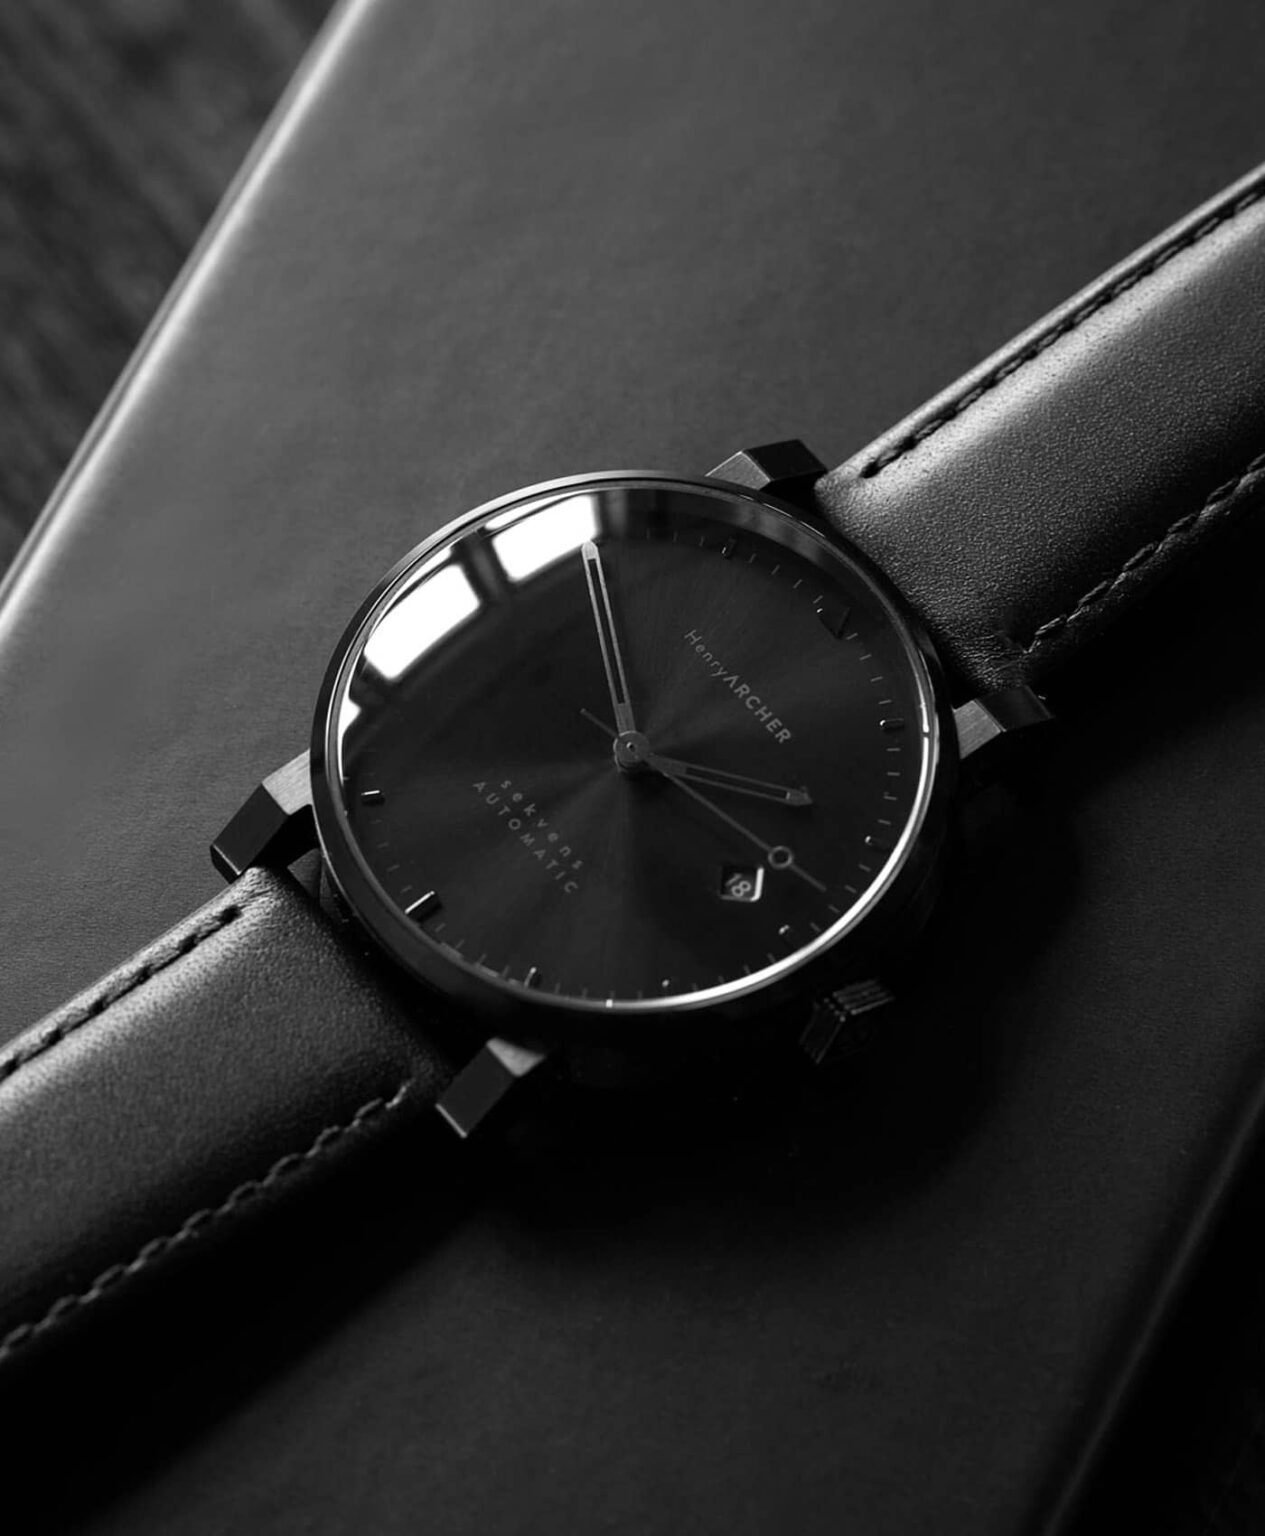 Mechanical Watches & Quality Straps Curated by WATCHBANDIT